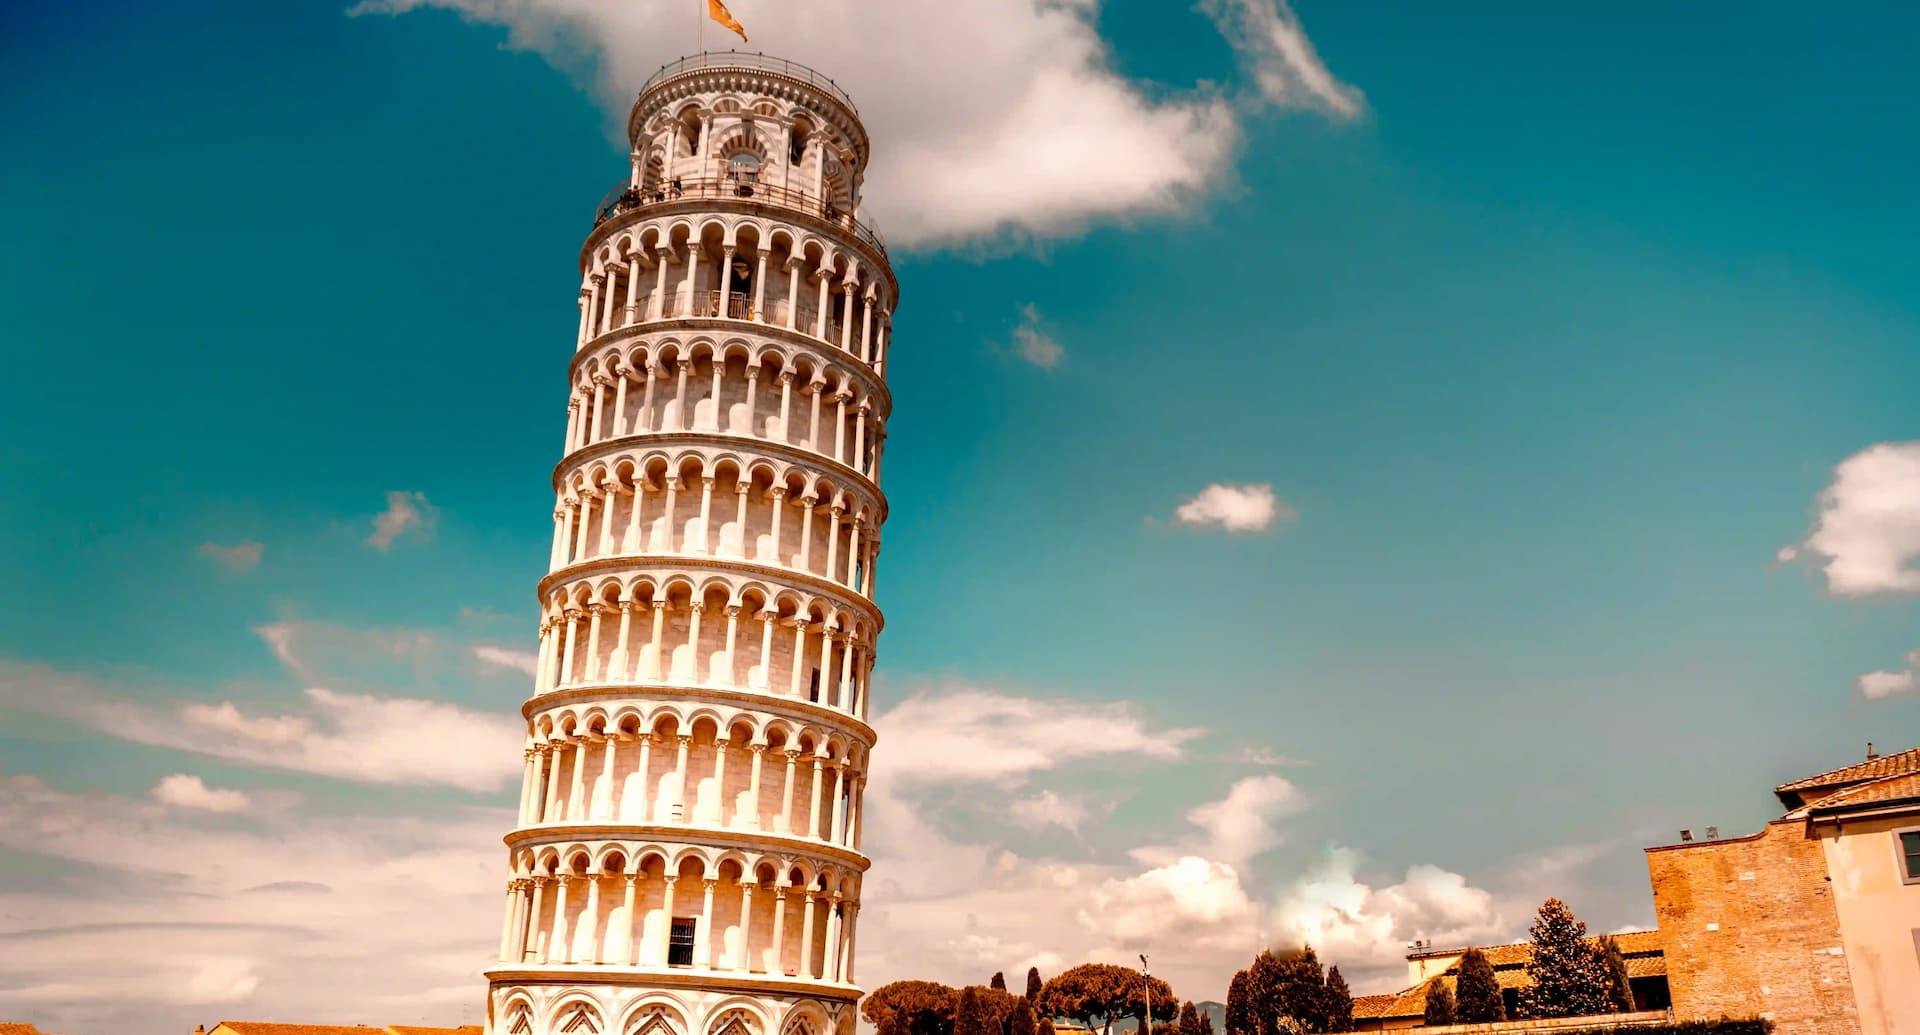 Leaning Tower of Pisa against a blue sky with clouds.